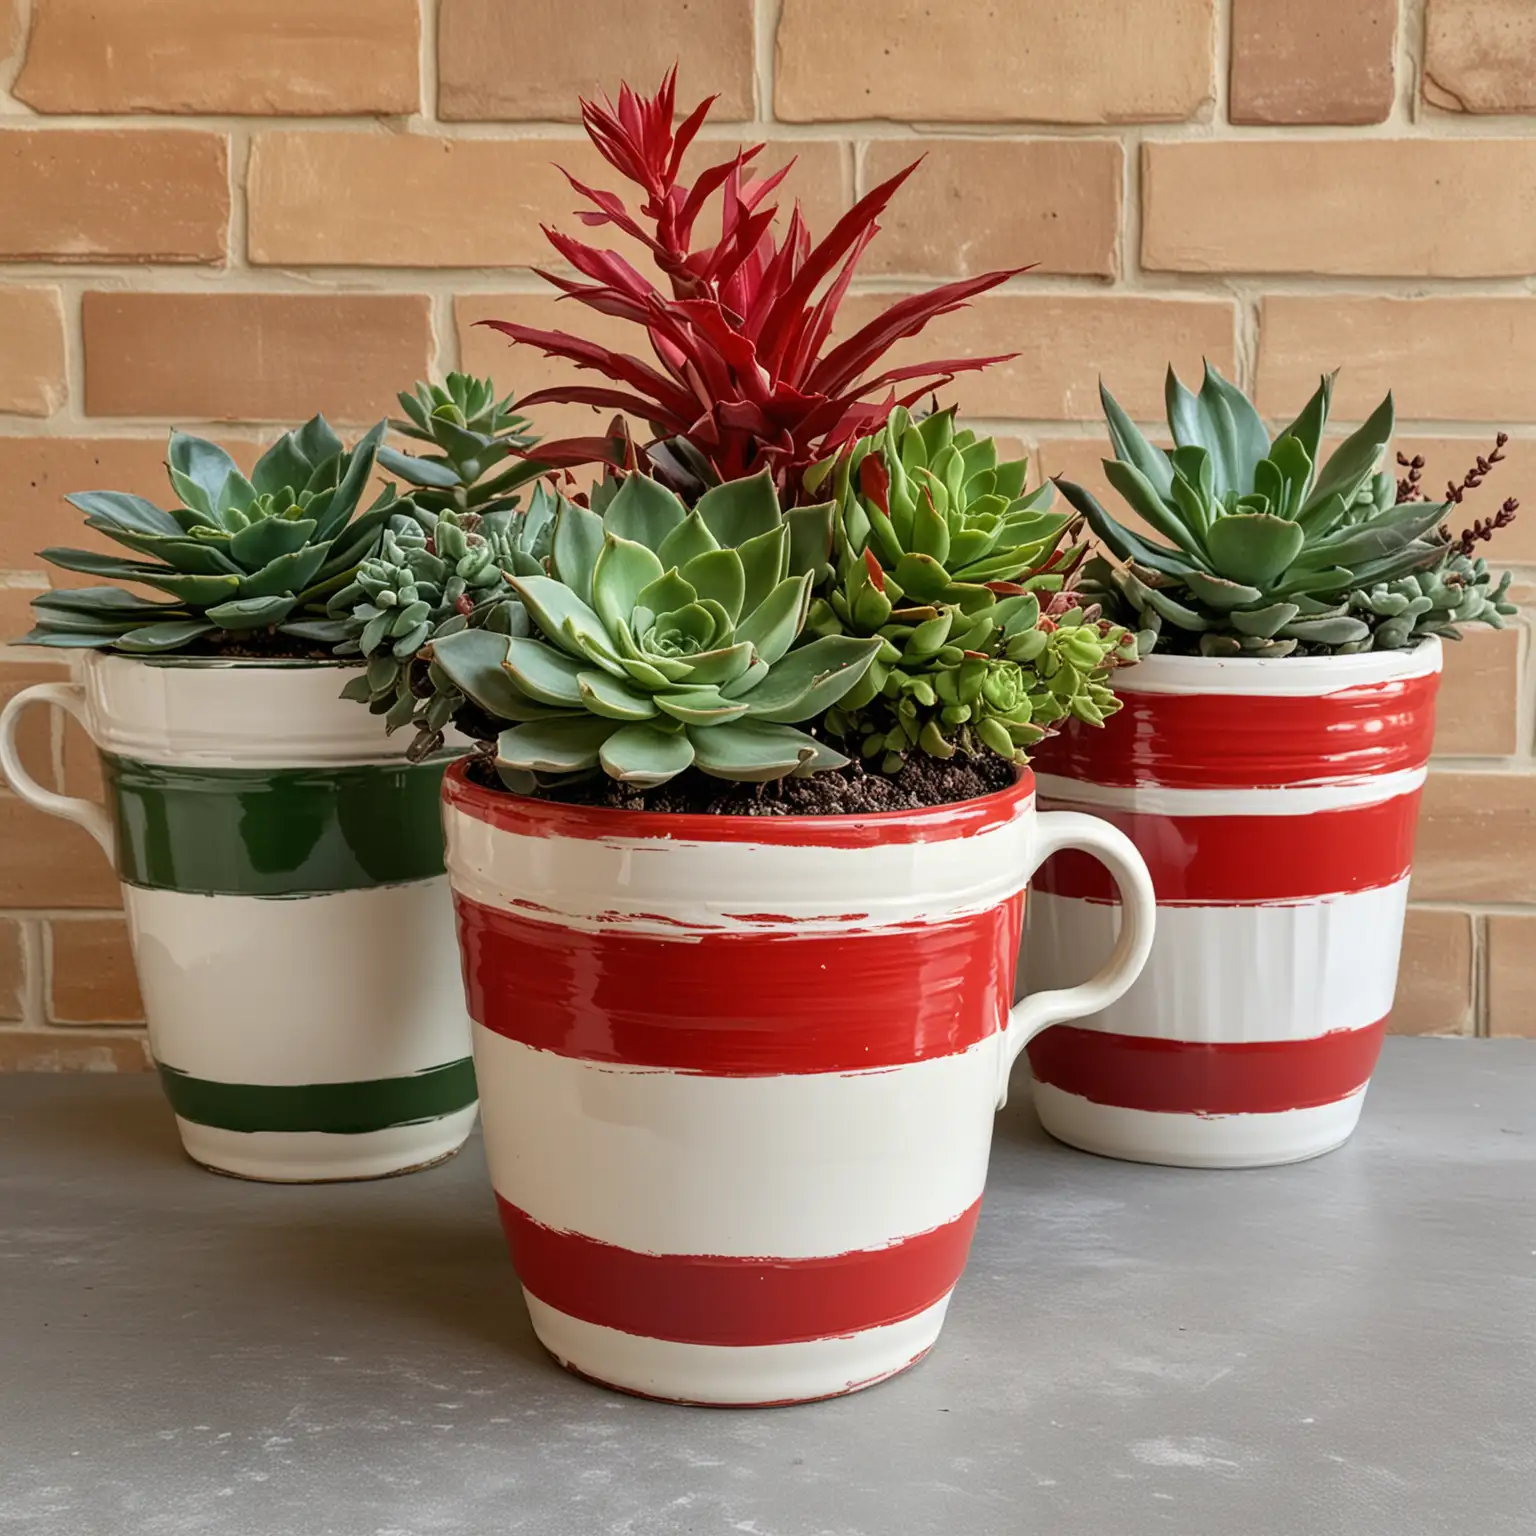 Traditional-Coffee-Cup-Vase-Arrangement-with-Succulents